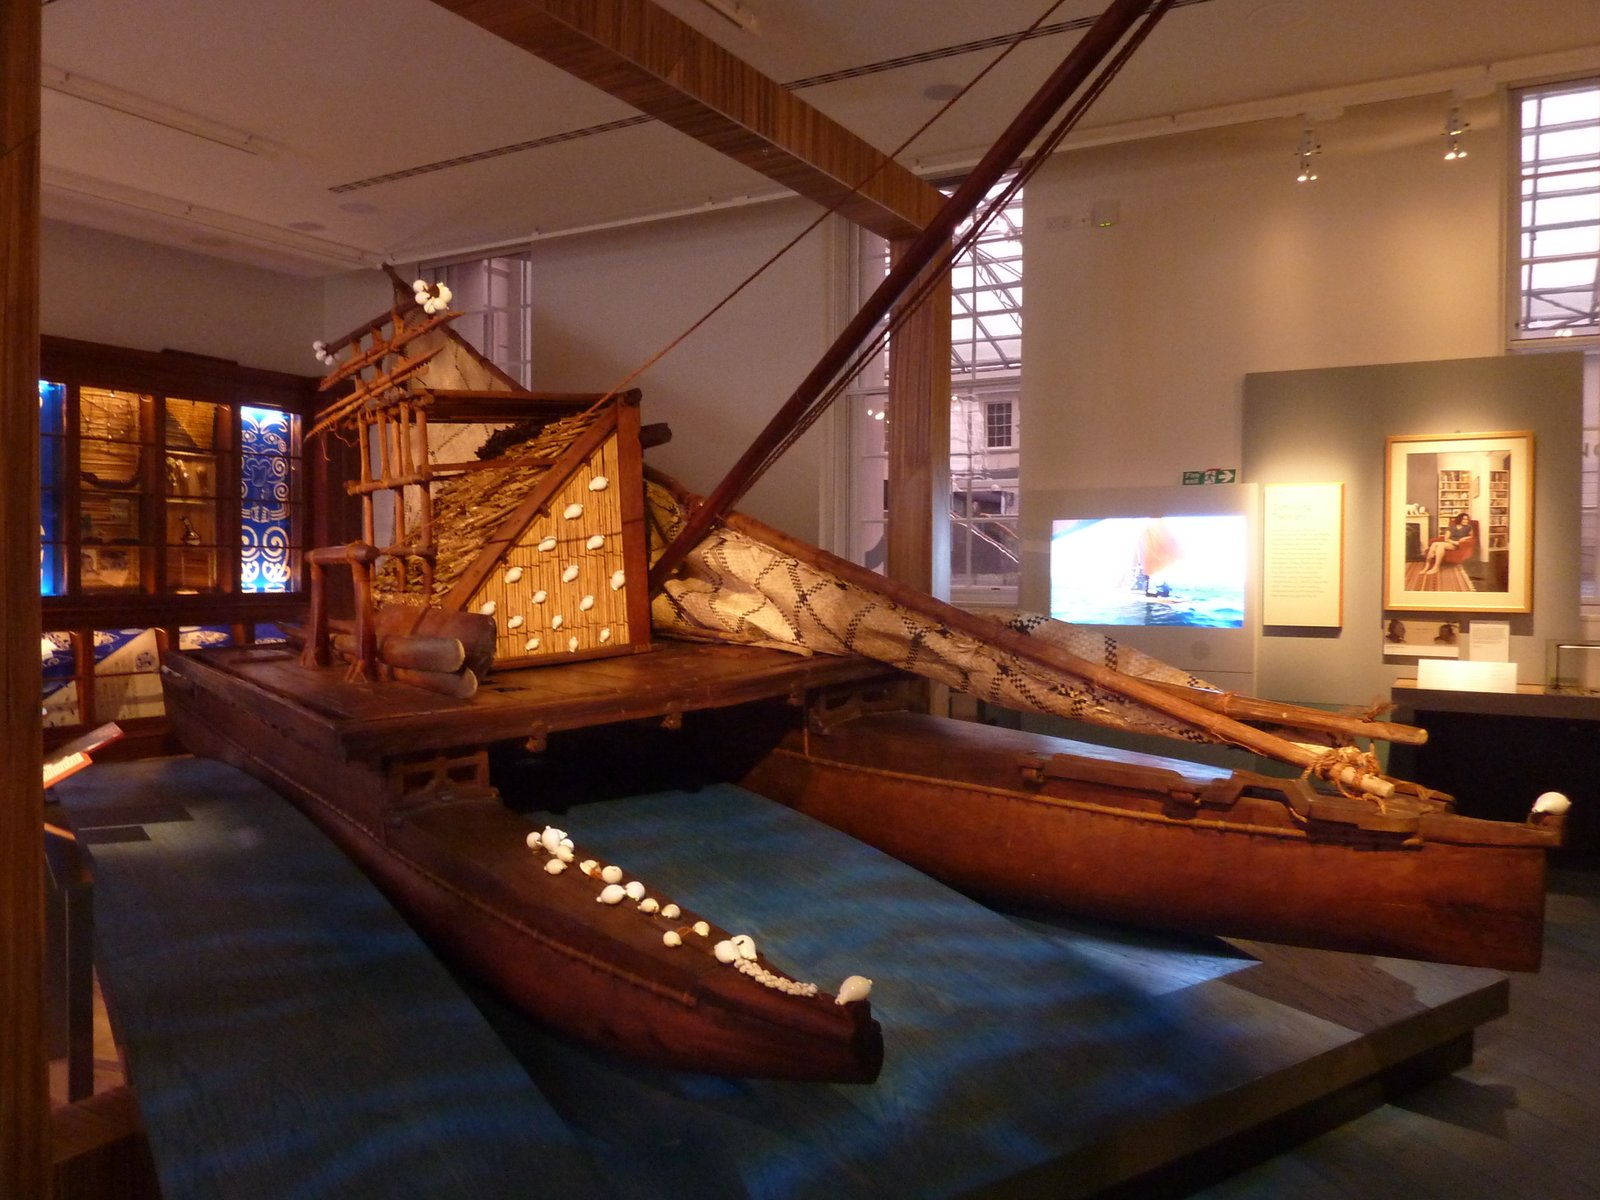 National Maritime Museum - Pacific Encounters